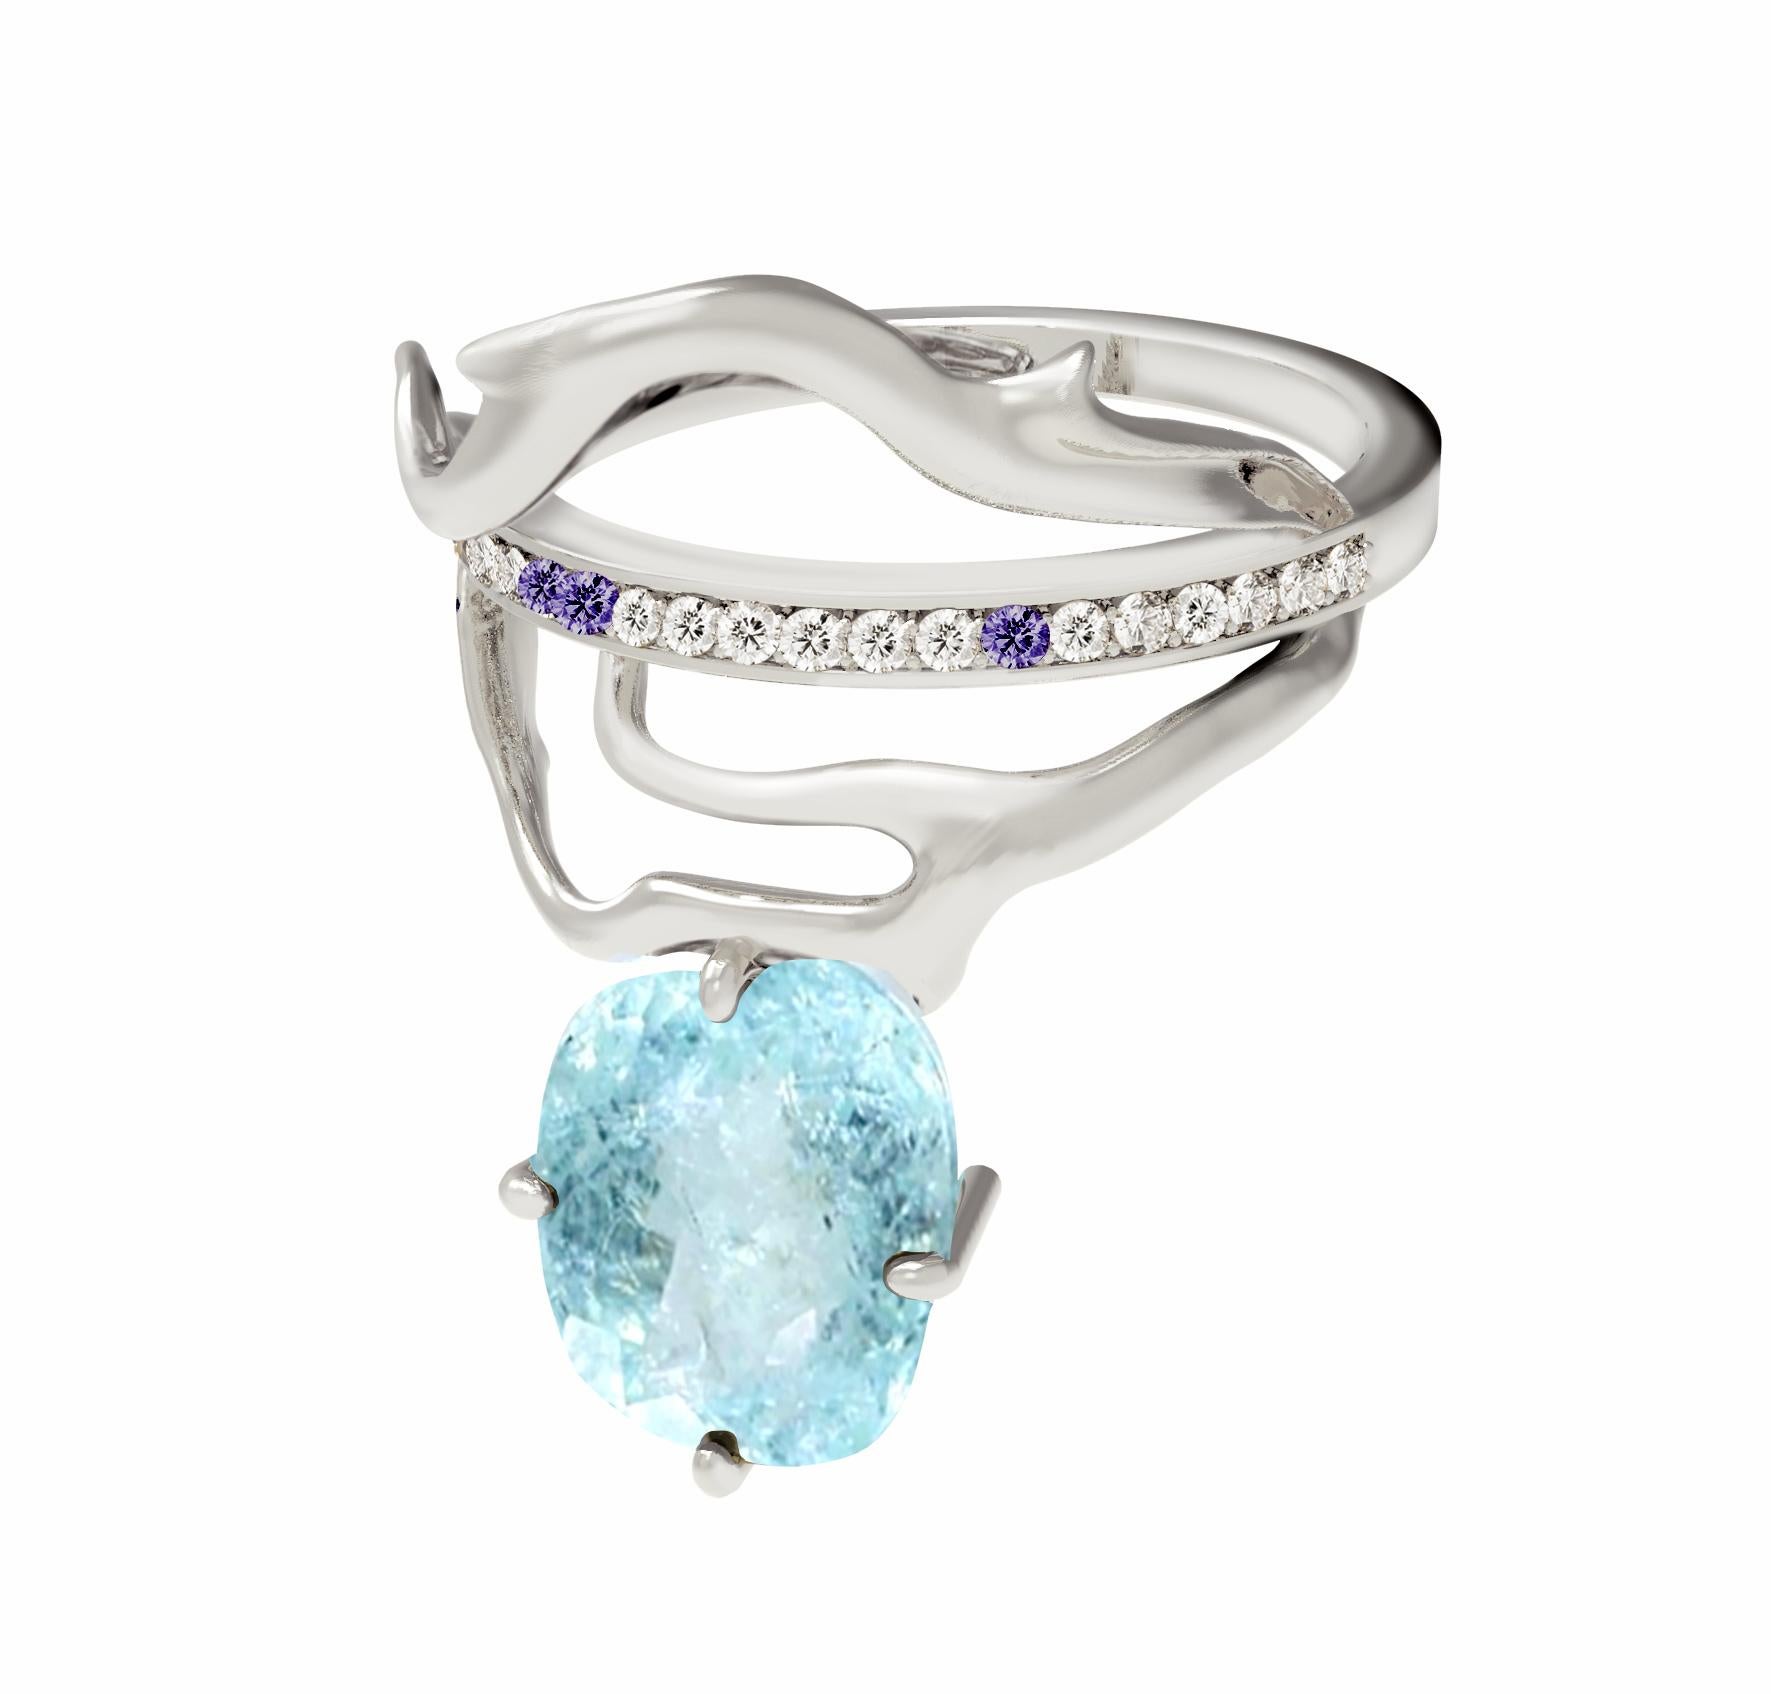 Contemporary 18 Karat White Gold Diamonds Fashion Ring with Paraiba Tourmaline and Amethysts For Sale